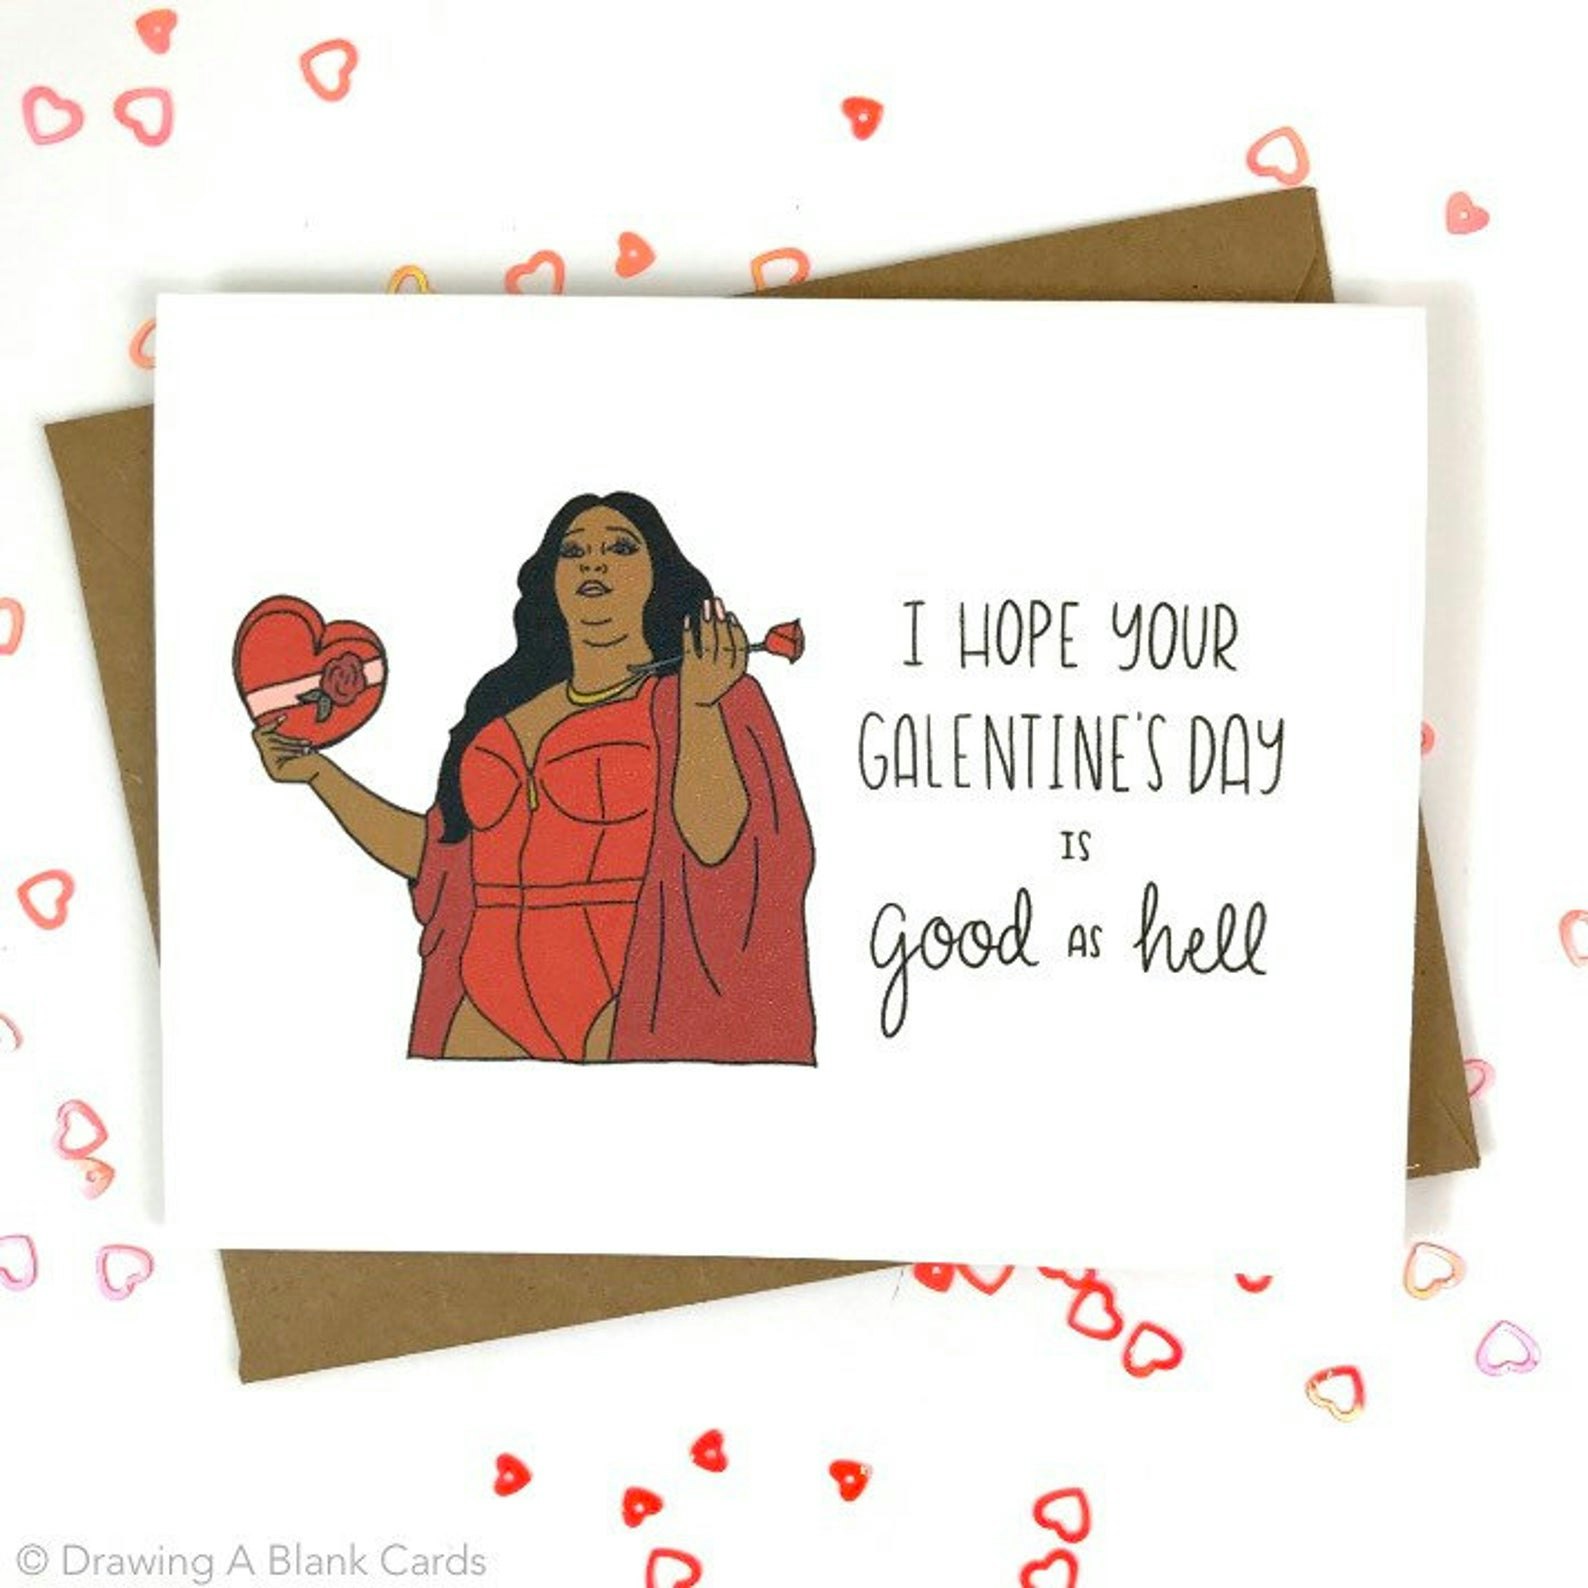 11 Crazy Old Valentine's Day Cards That Would Never Exist Today - 11  Points